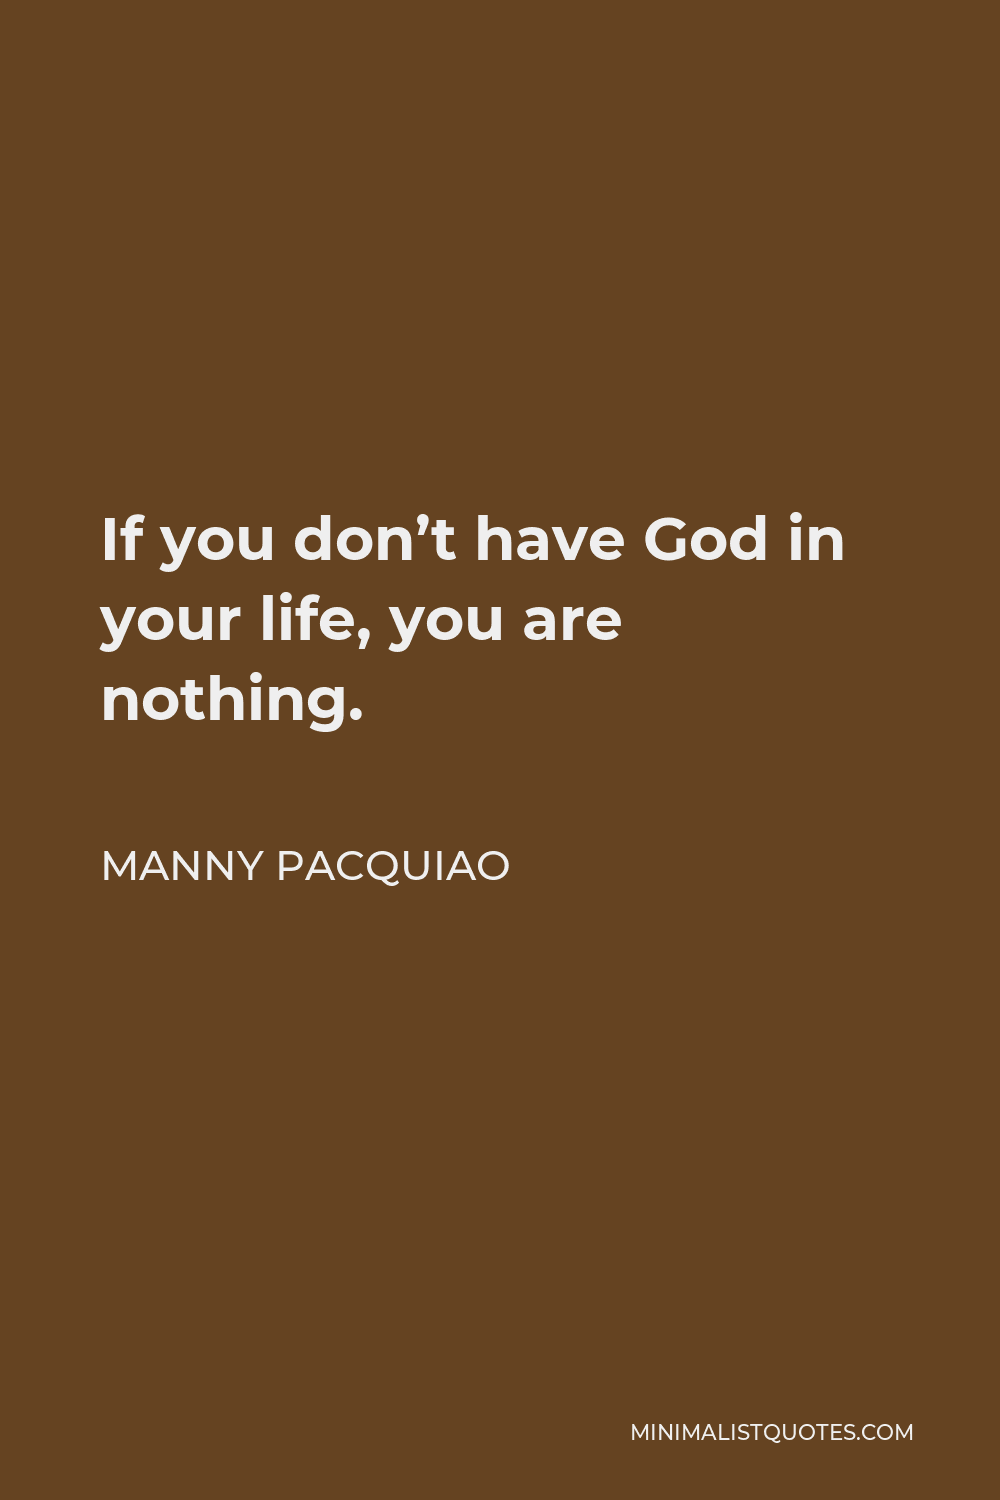 Manny Pacquiao Quote - If you don’t have God in your life, you are nothing.